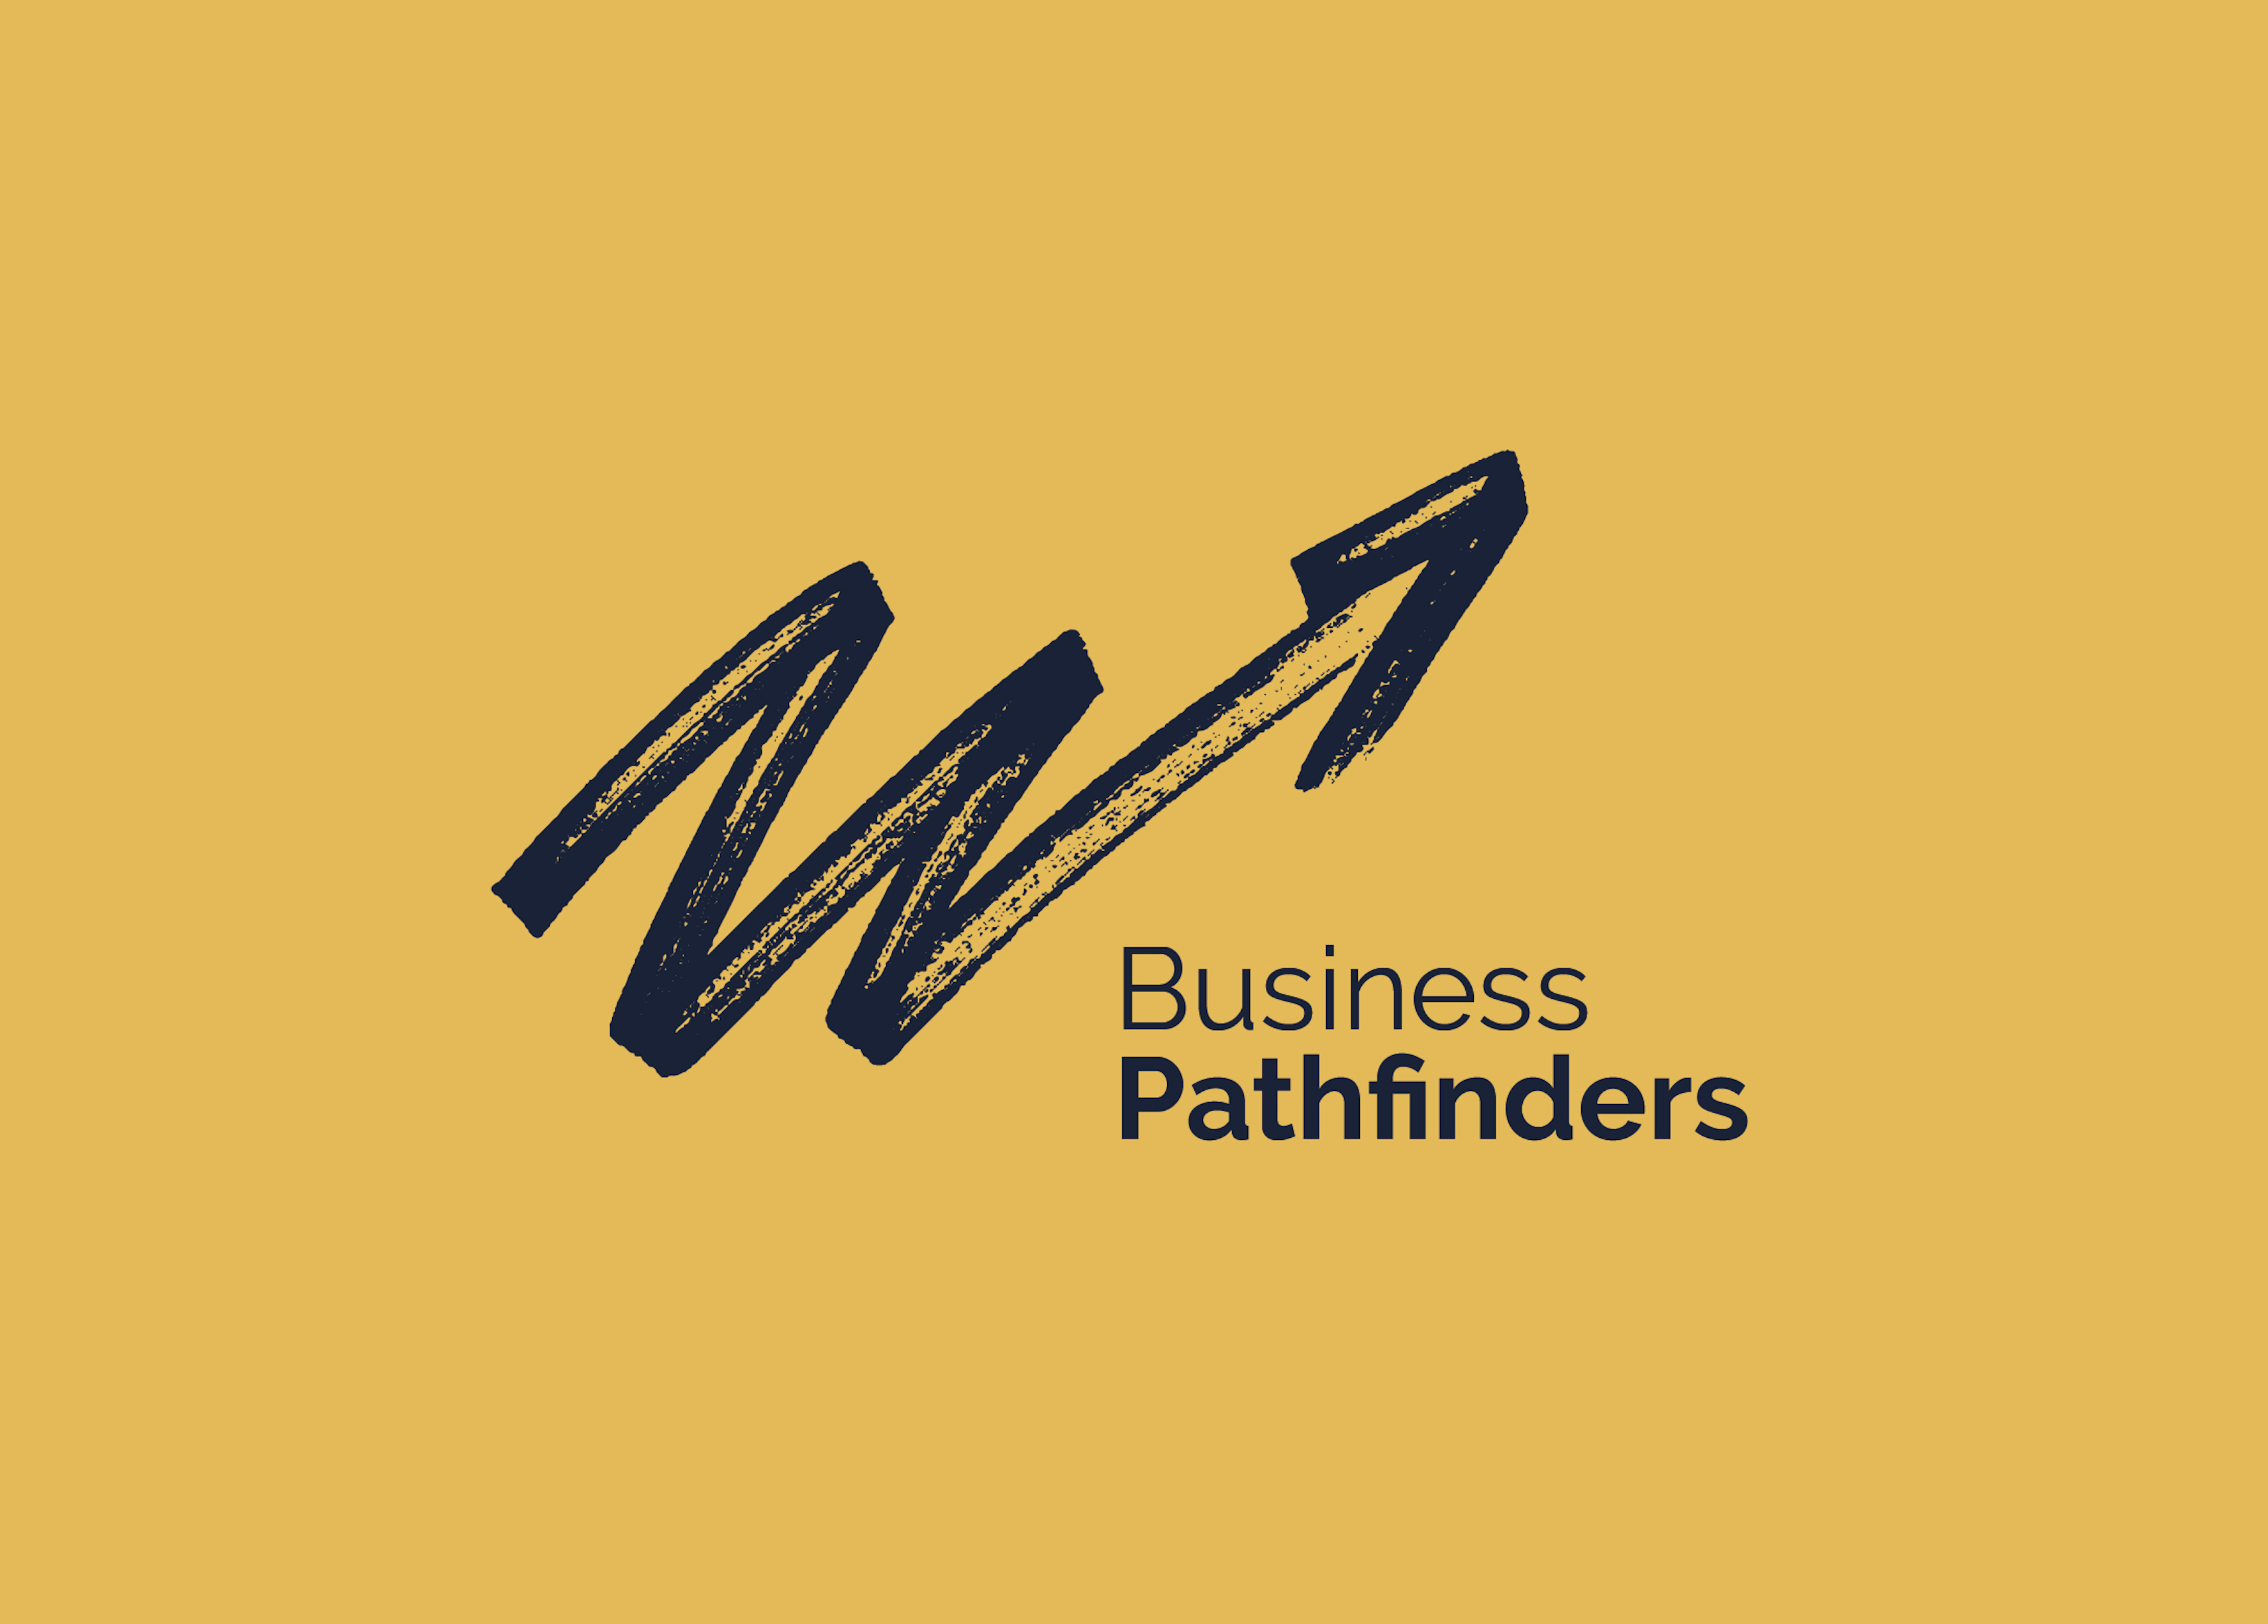 Business Pathfinders - helping your business succeed